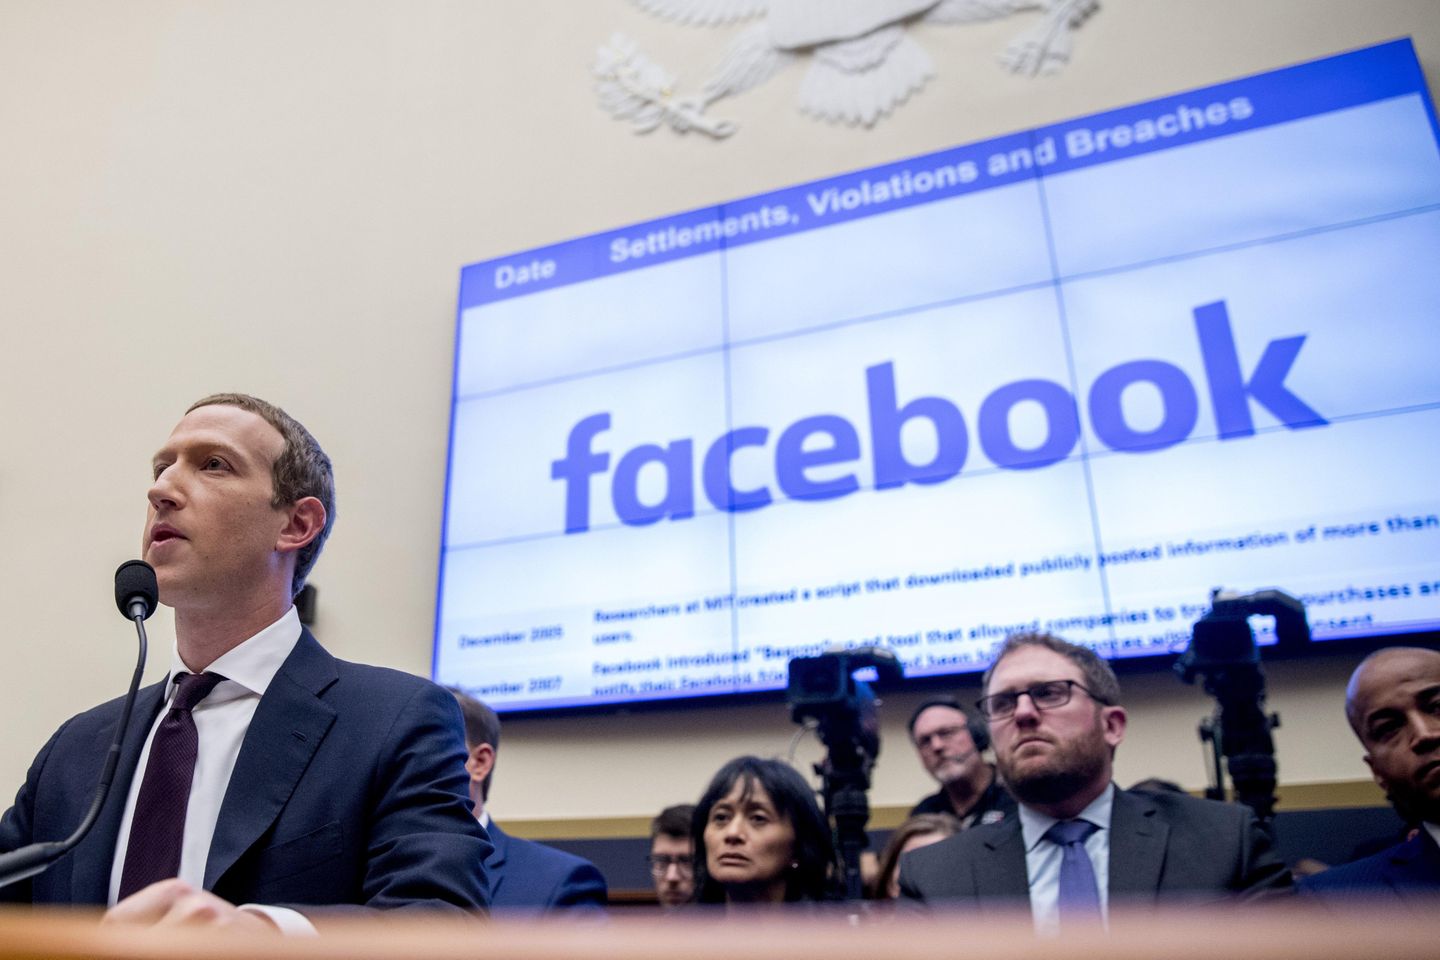 Facebook says users can half advice on immigrant smuggling